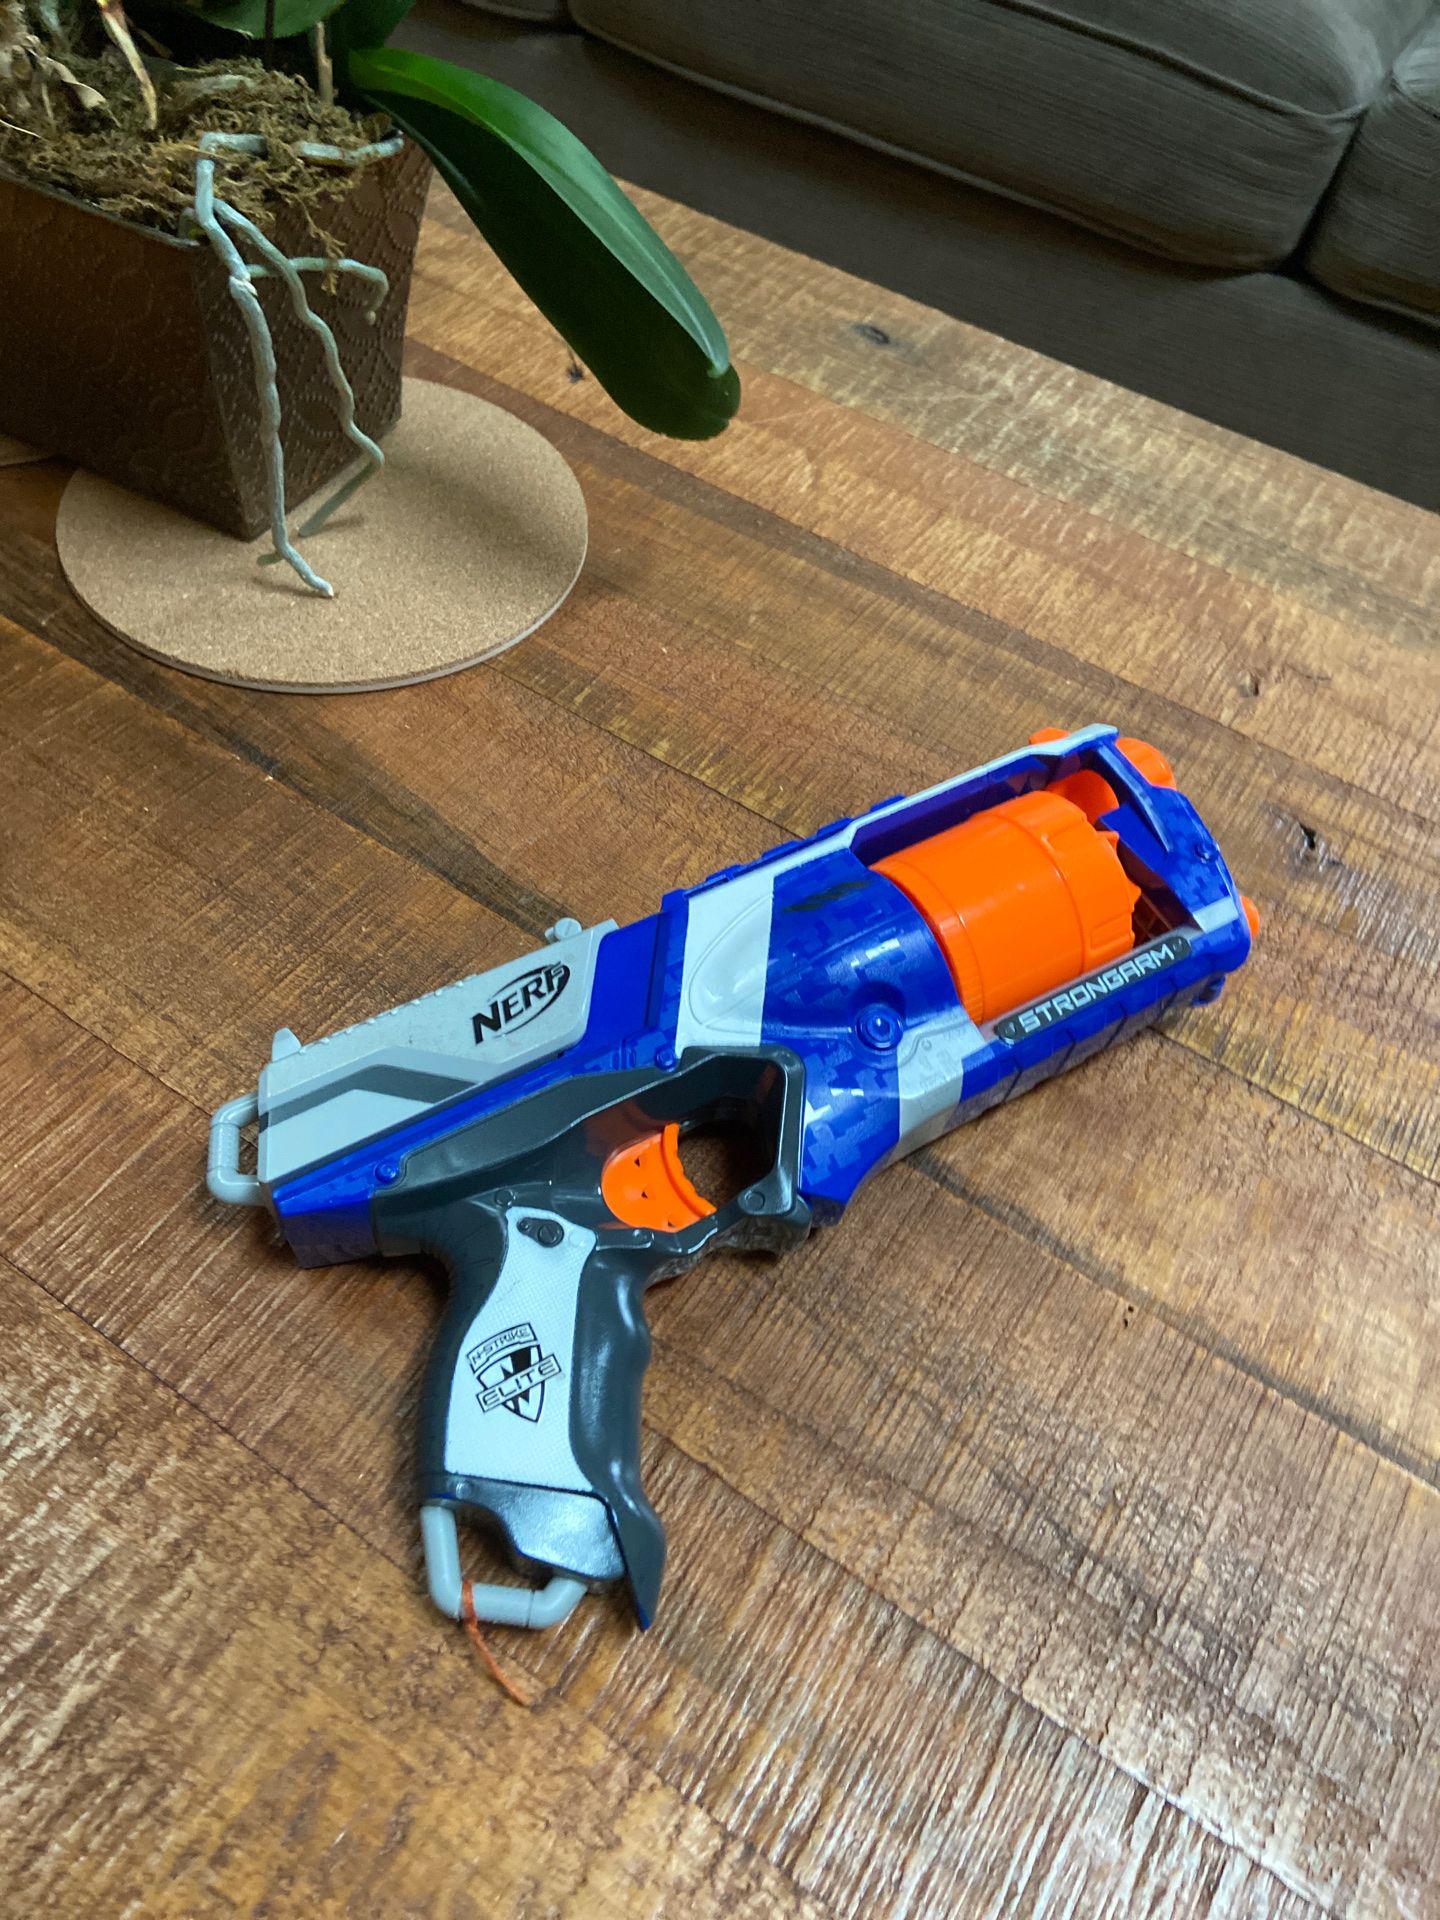 Strongarm nerf gun, comes with full mag